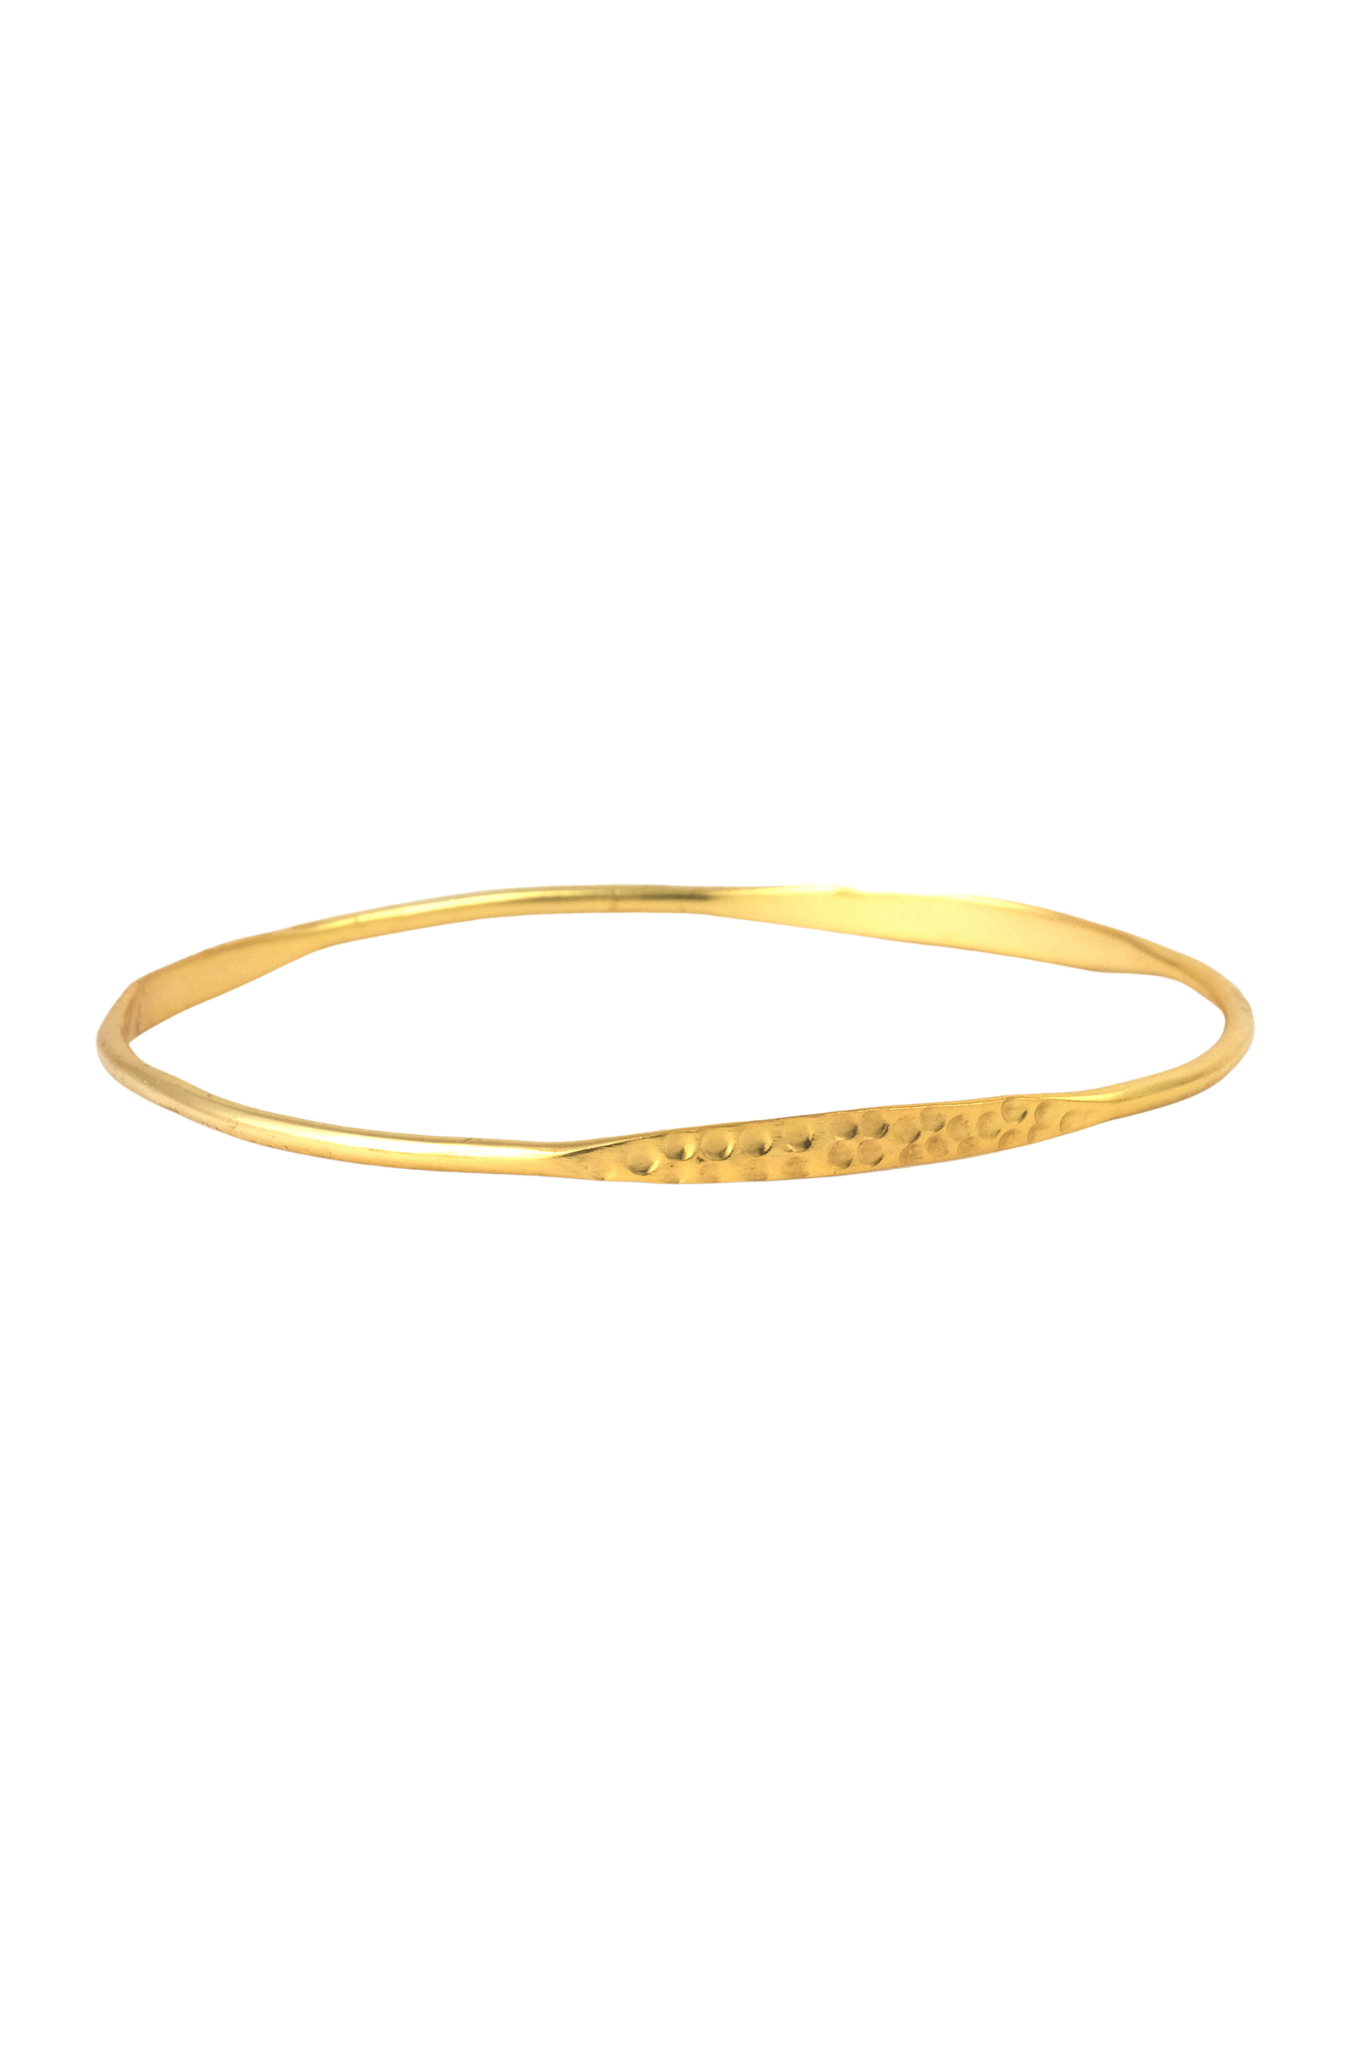 Gold Bracelet with Texture